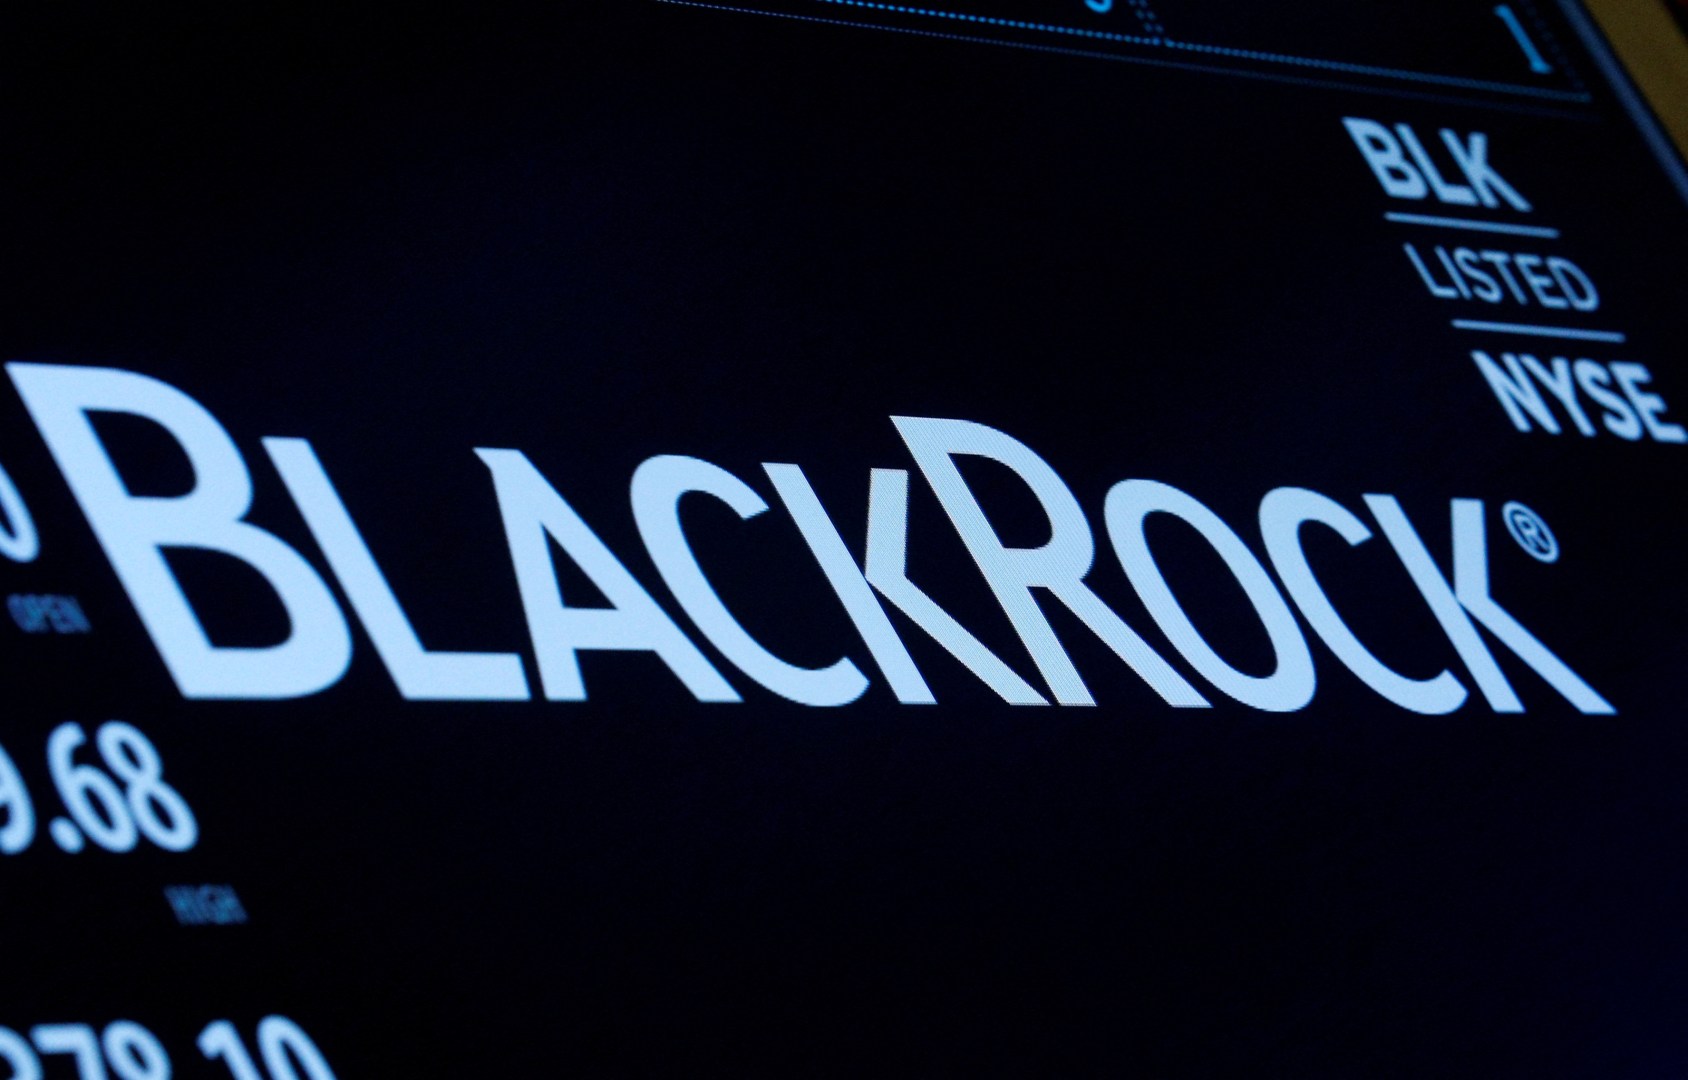 Tennessee Attorney General files lawsuit against BlackRock, accusing the asset manager of misleading consumers about its leftwing goals.